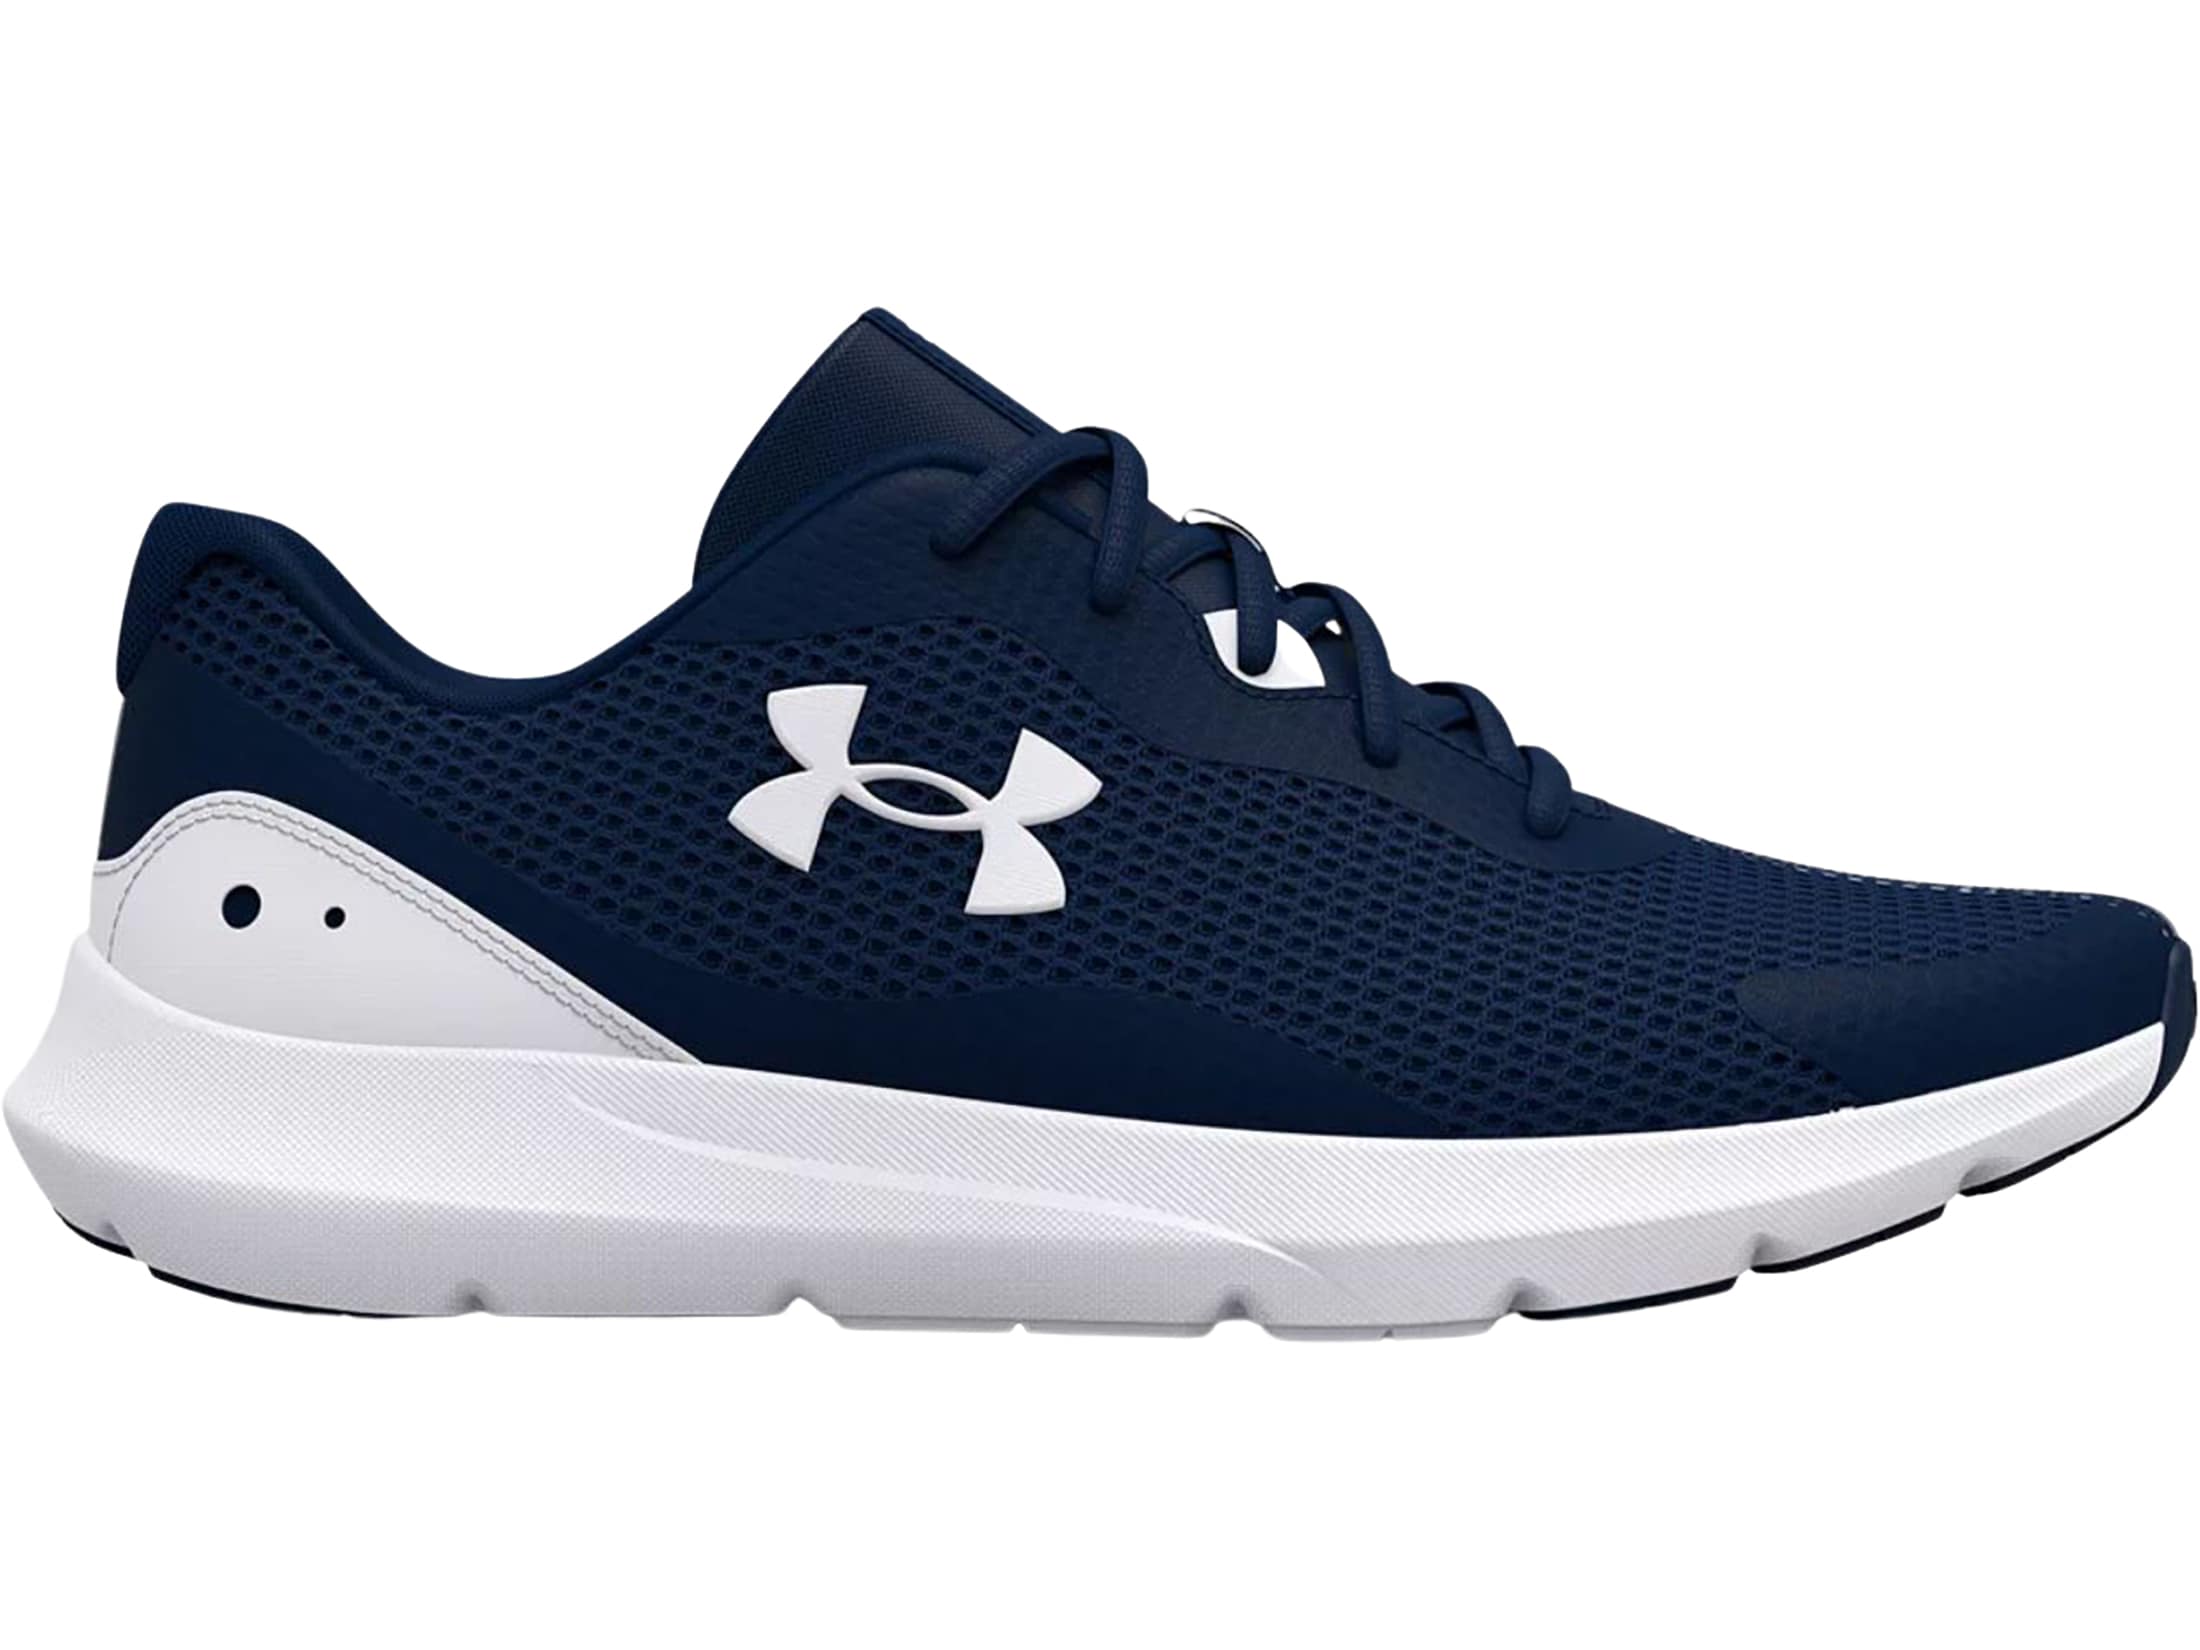 Under Armour Surge 3 Running Shoes Synthetic Mod Gray/White/Royal